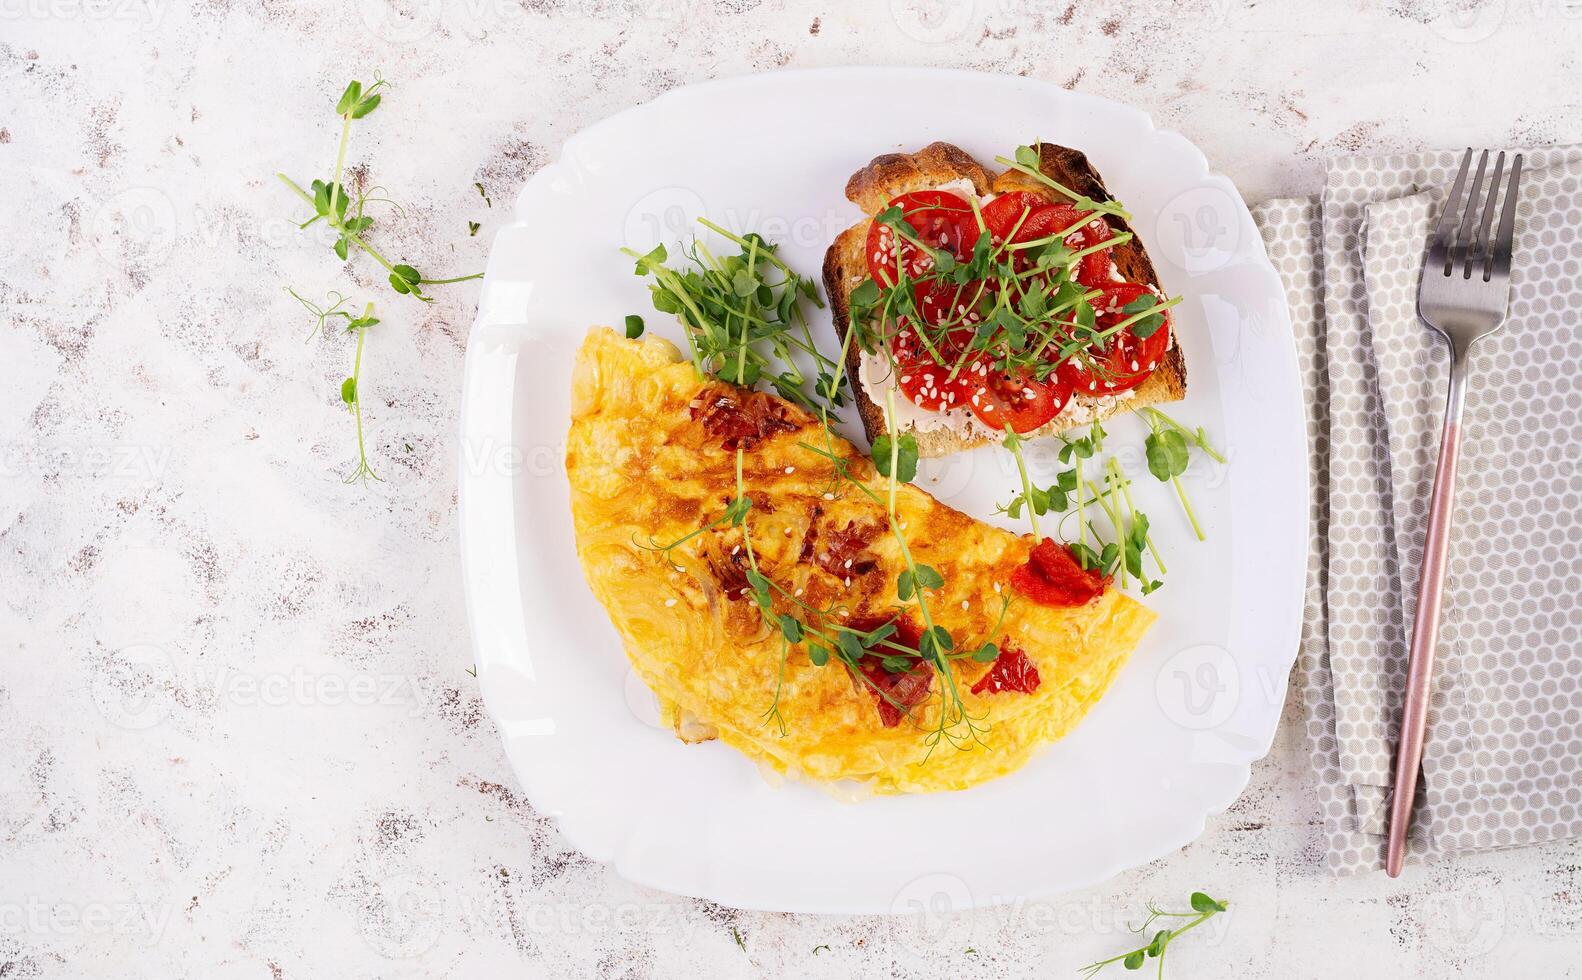 Omelette with cheese and toast with tomatoes on white plate.  Frittata - italian omelet. Top view, flat lay photo